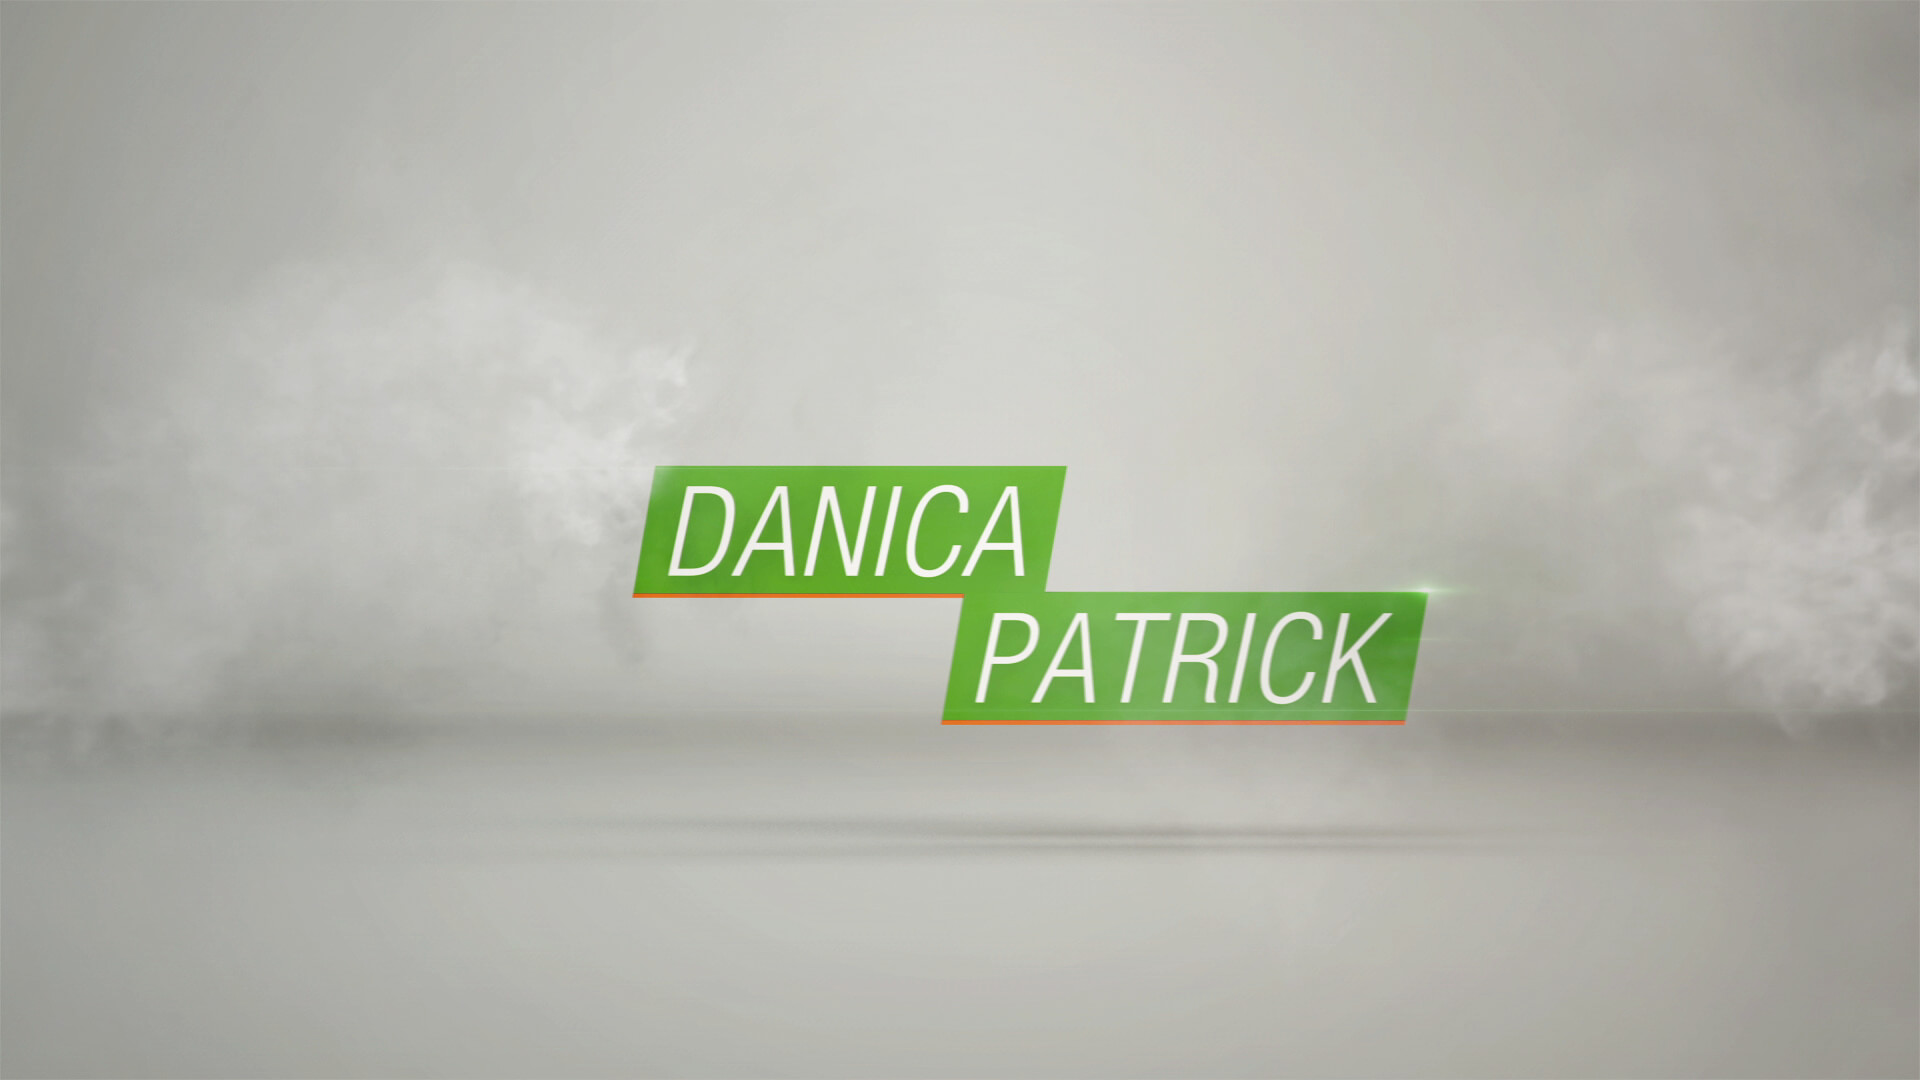 Danica Patrick super still frame from Scottsdale, AZ based Go Daddy's The Big Leap Super Bowl ad campaign produced by Nashville based Anthem Pictures and animated by Nashville's ST8MNT employing bar strip box type and smoke